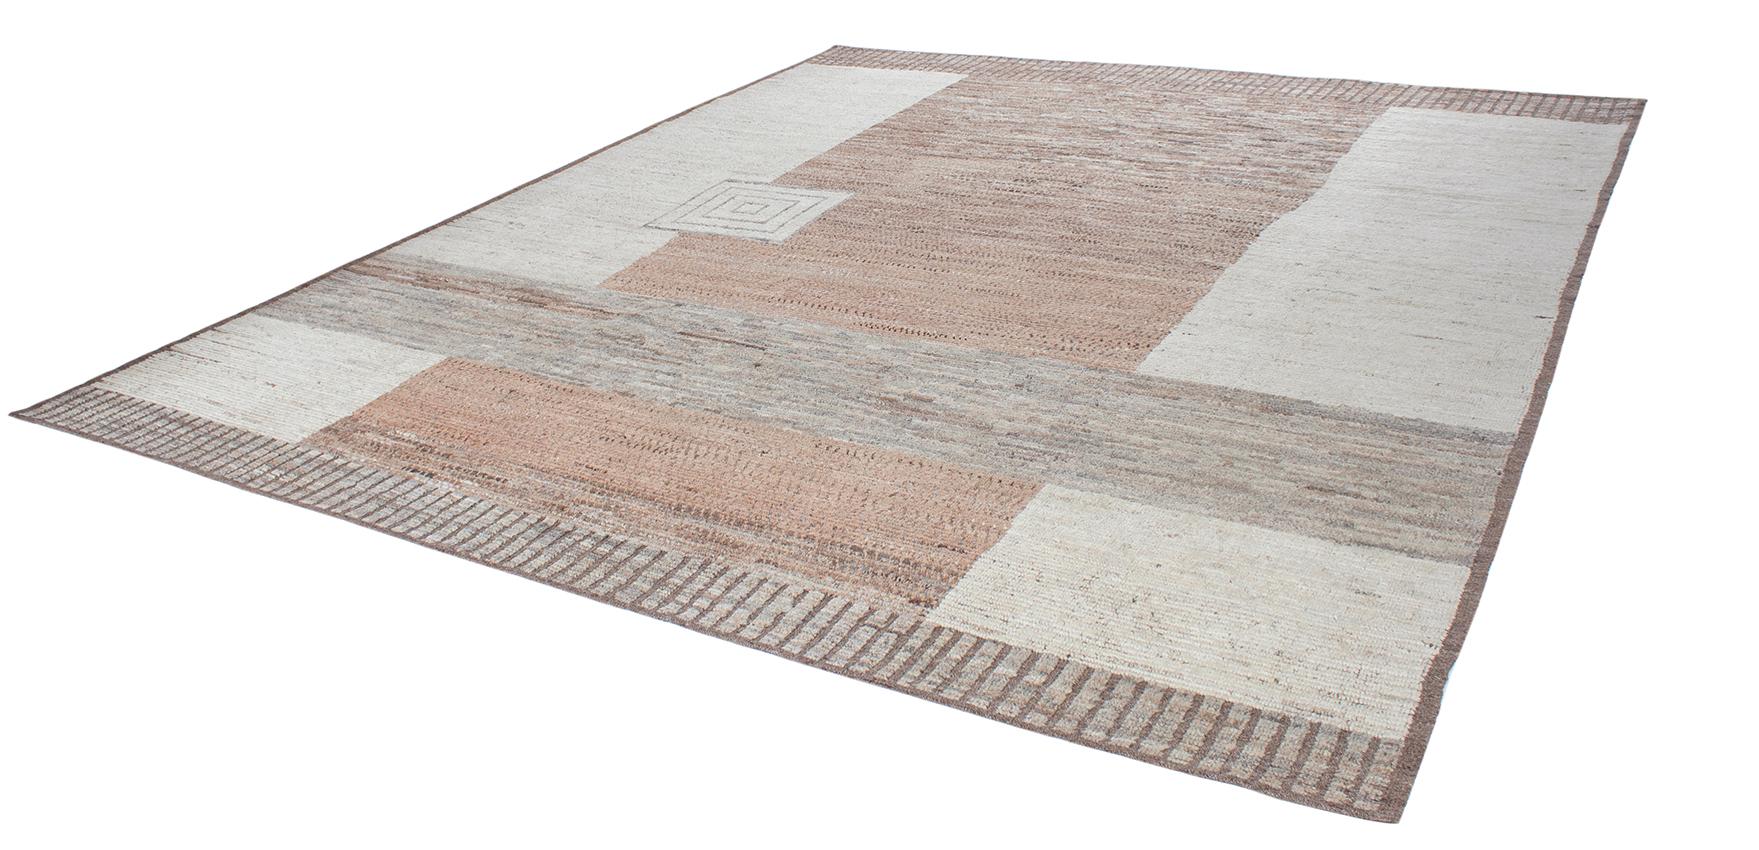 Afghan Modern Minimalist Mid-Century Style Wool Rug in Beige, Copper, and Grey Tones For Sale